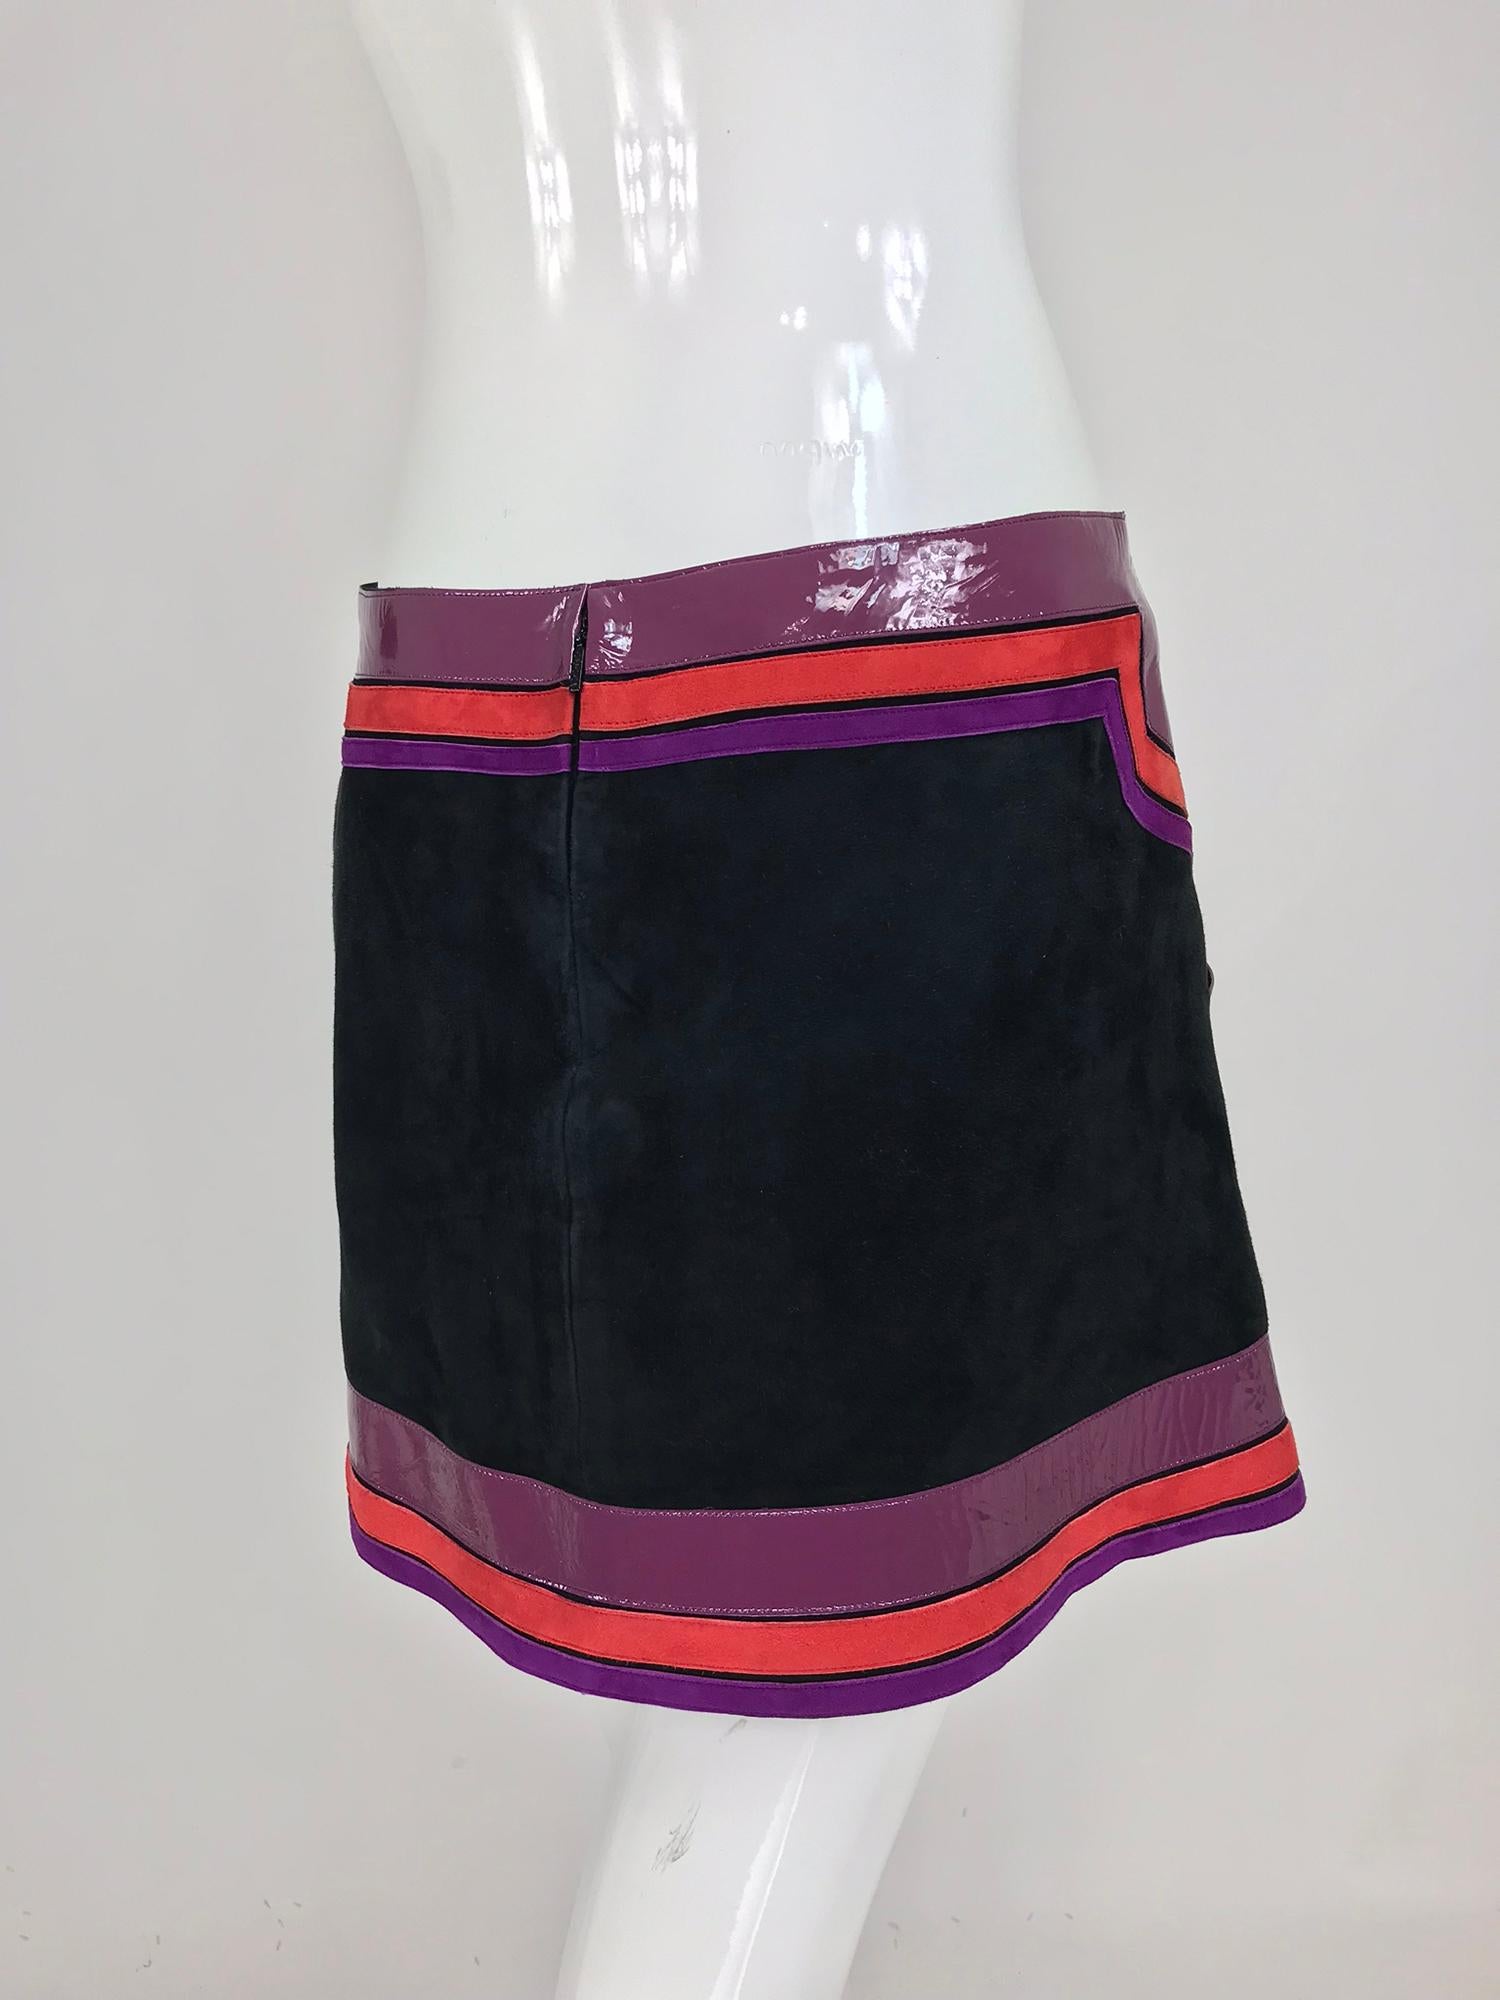 Gucci Black Suede Skirt Purple and Red Patent Leather Trim S/S 2007  2